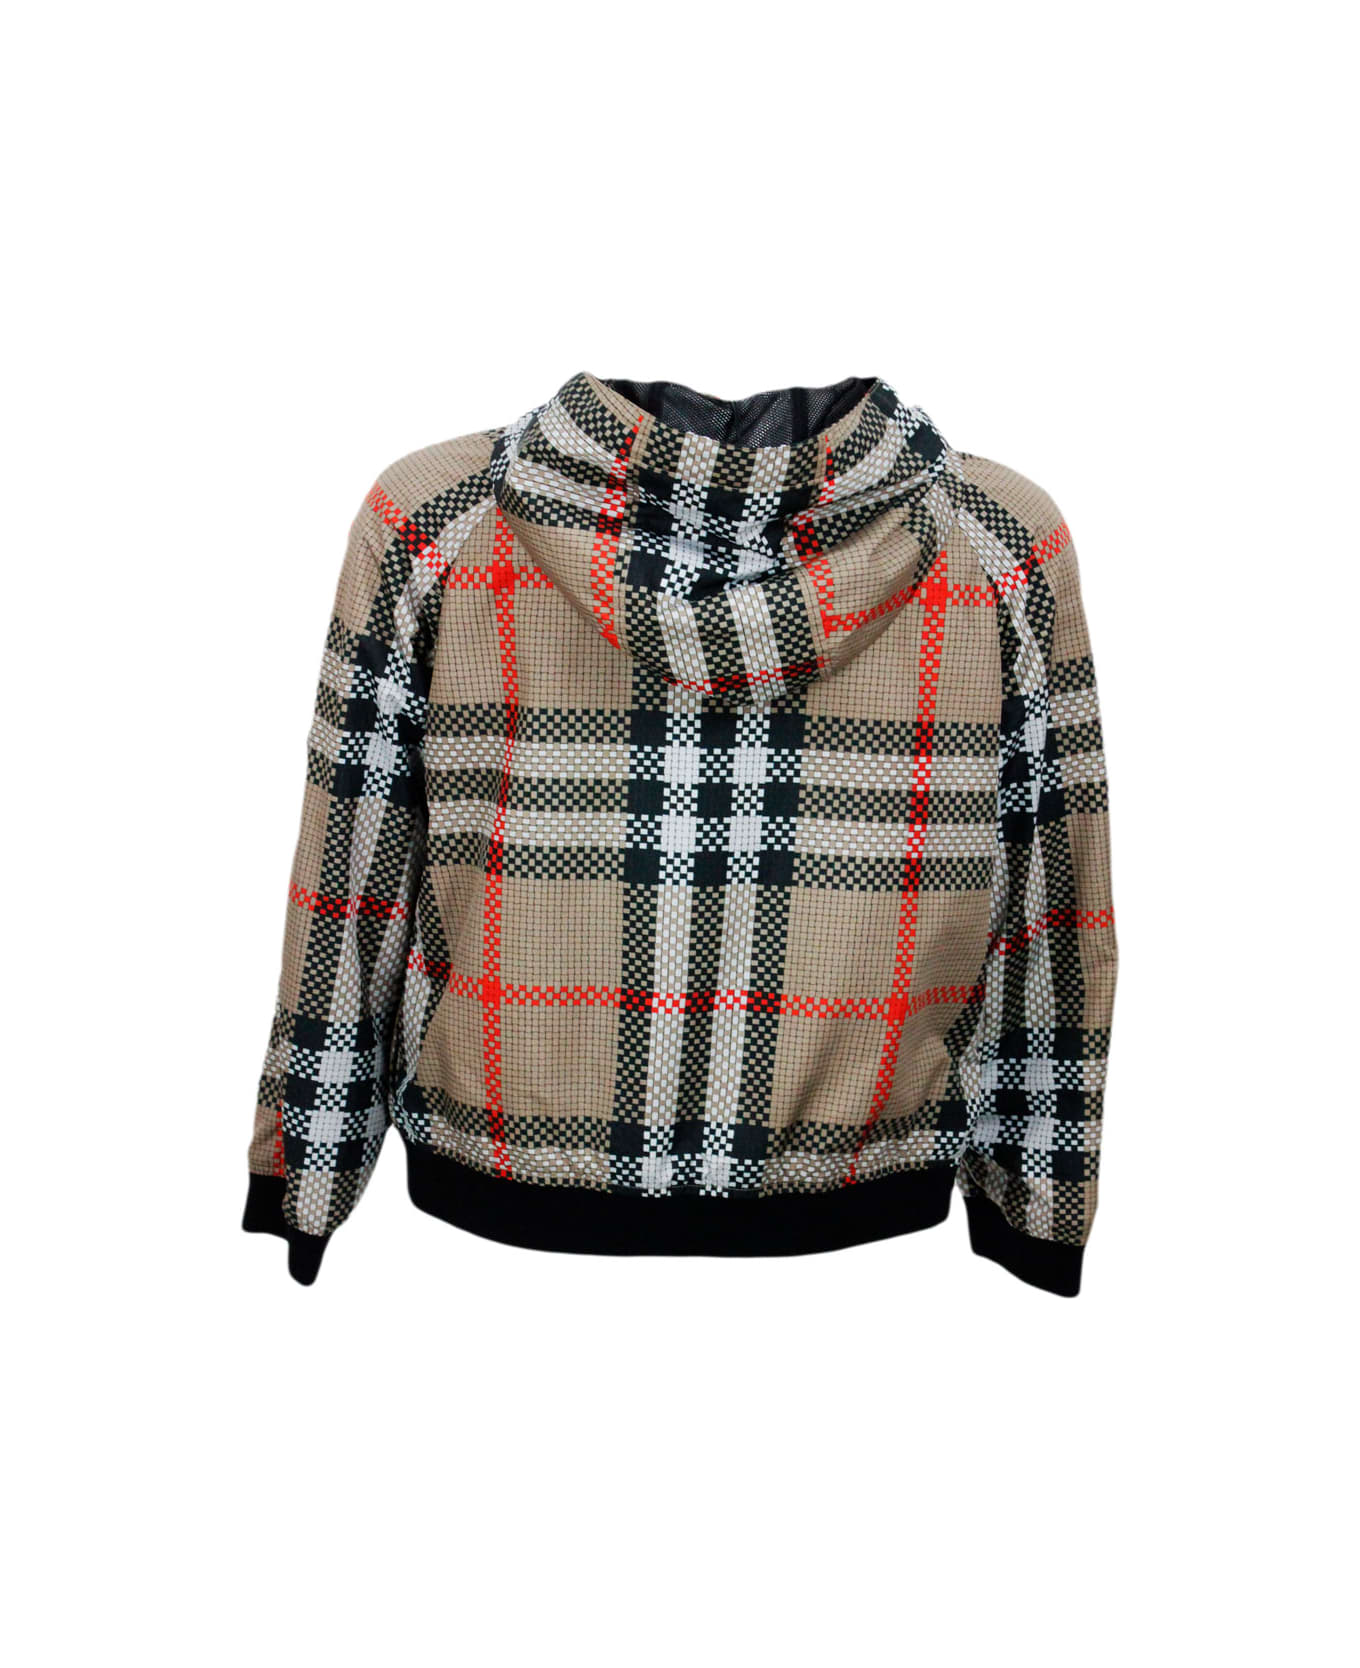 Burberry Lightweight Windproof Jacket In Technical Fabric With Hood And Zip Closure In Burberry New Check - Check Beige